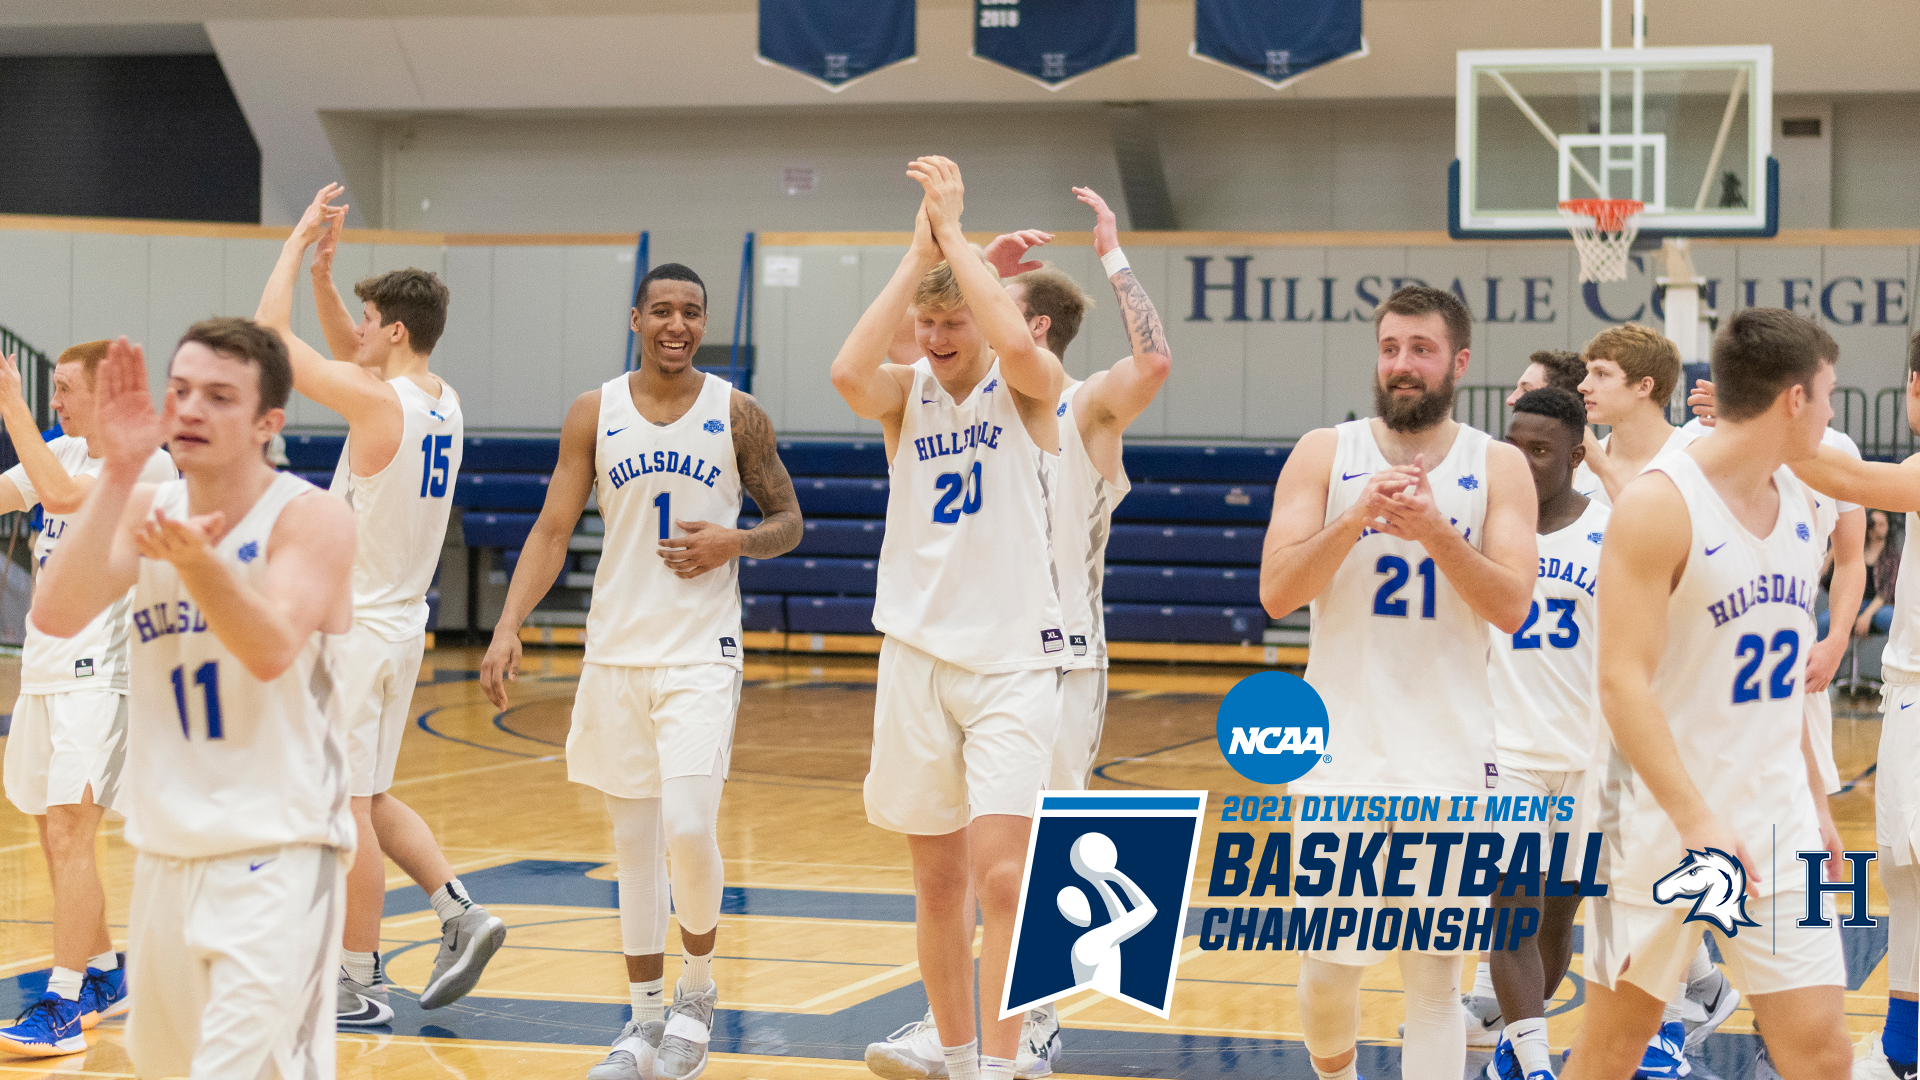 Charger men's basketball team earns sixth NCAA Tourney berth; first No. 1 seed